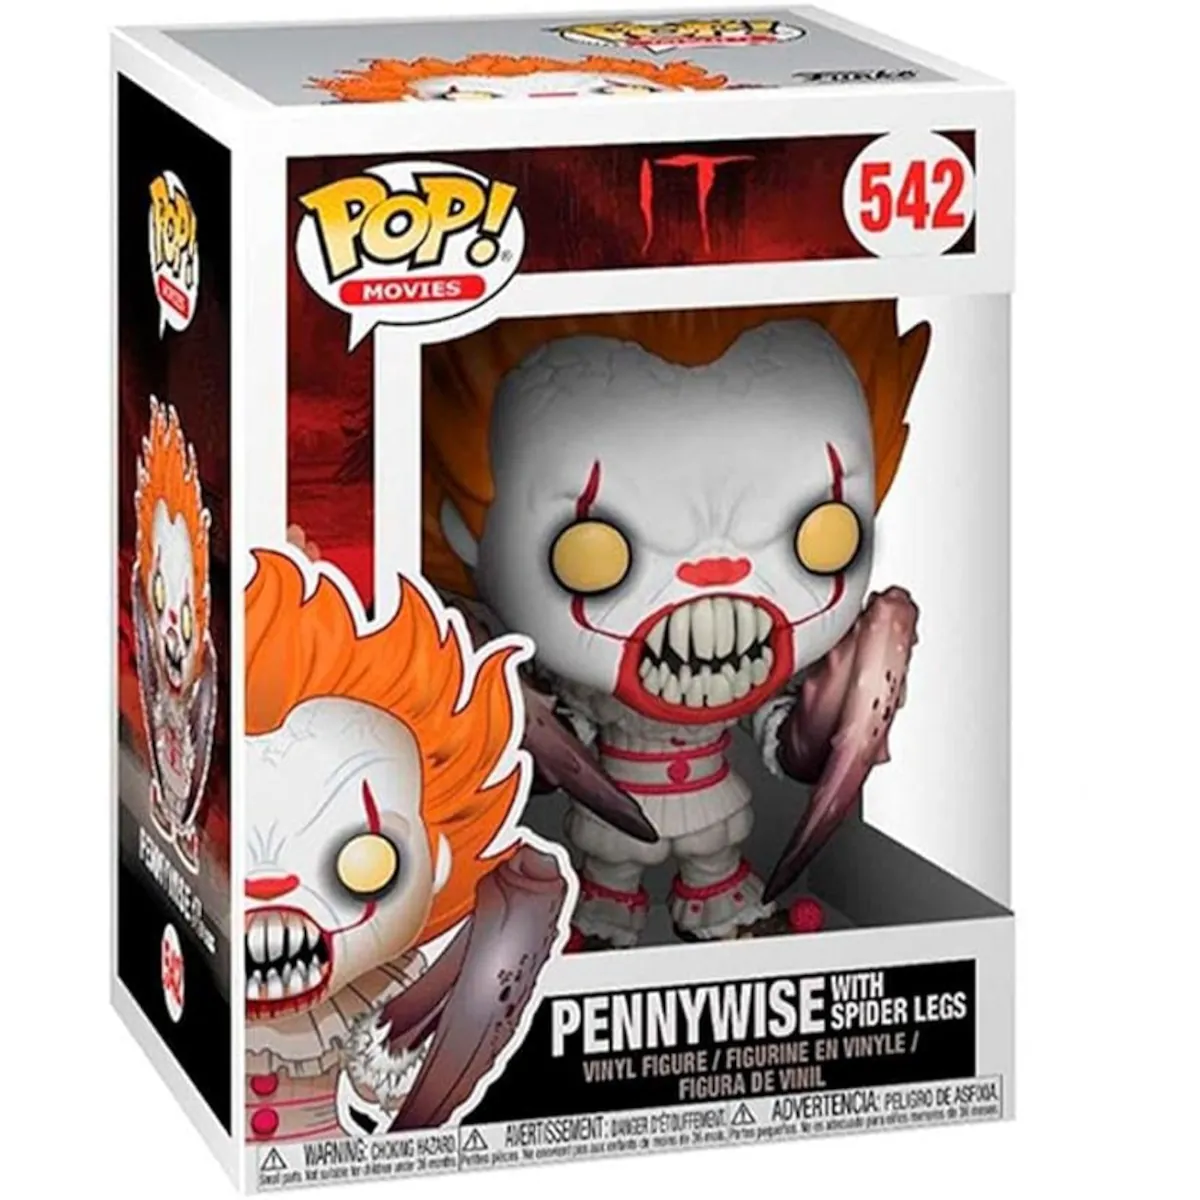 29526 Funko Pop! Movies - IT (2017) - Pennywise with Spider Legs Collectable Vinyl Figure Box Front